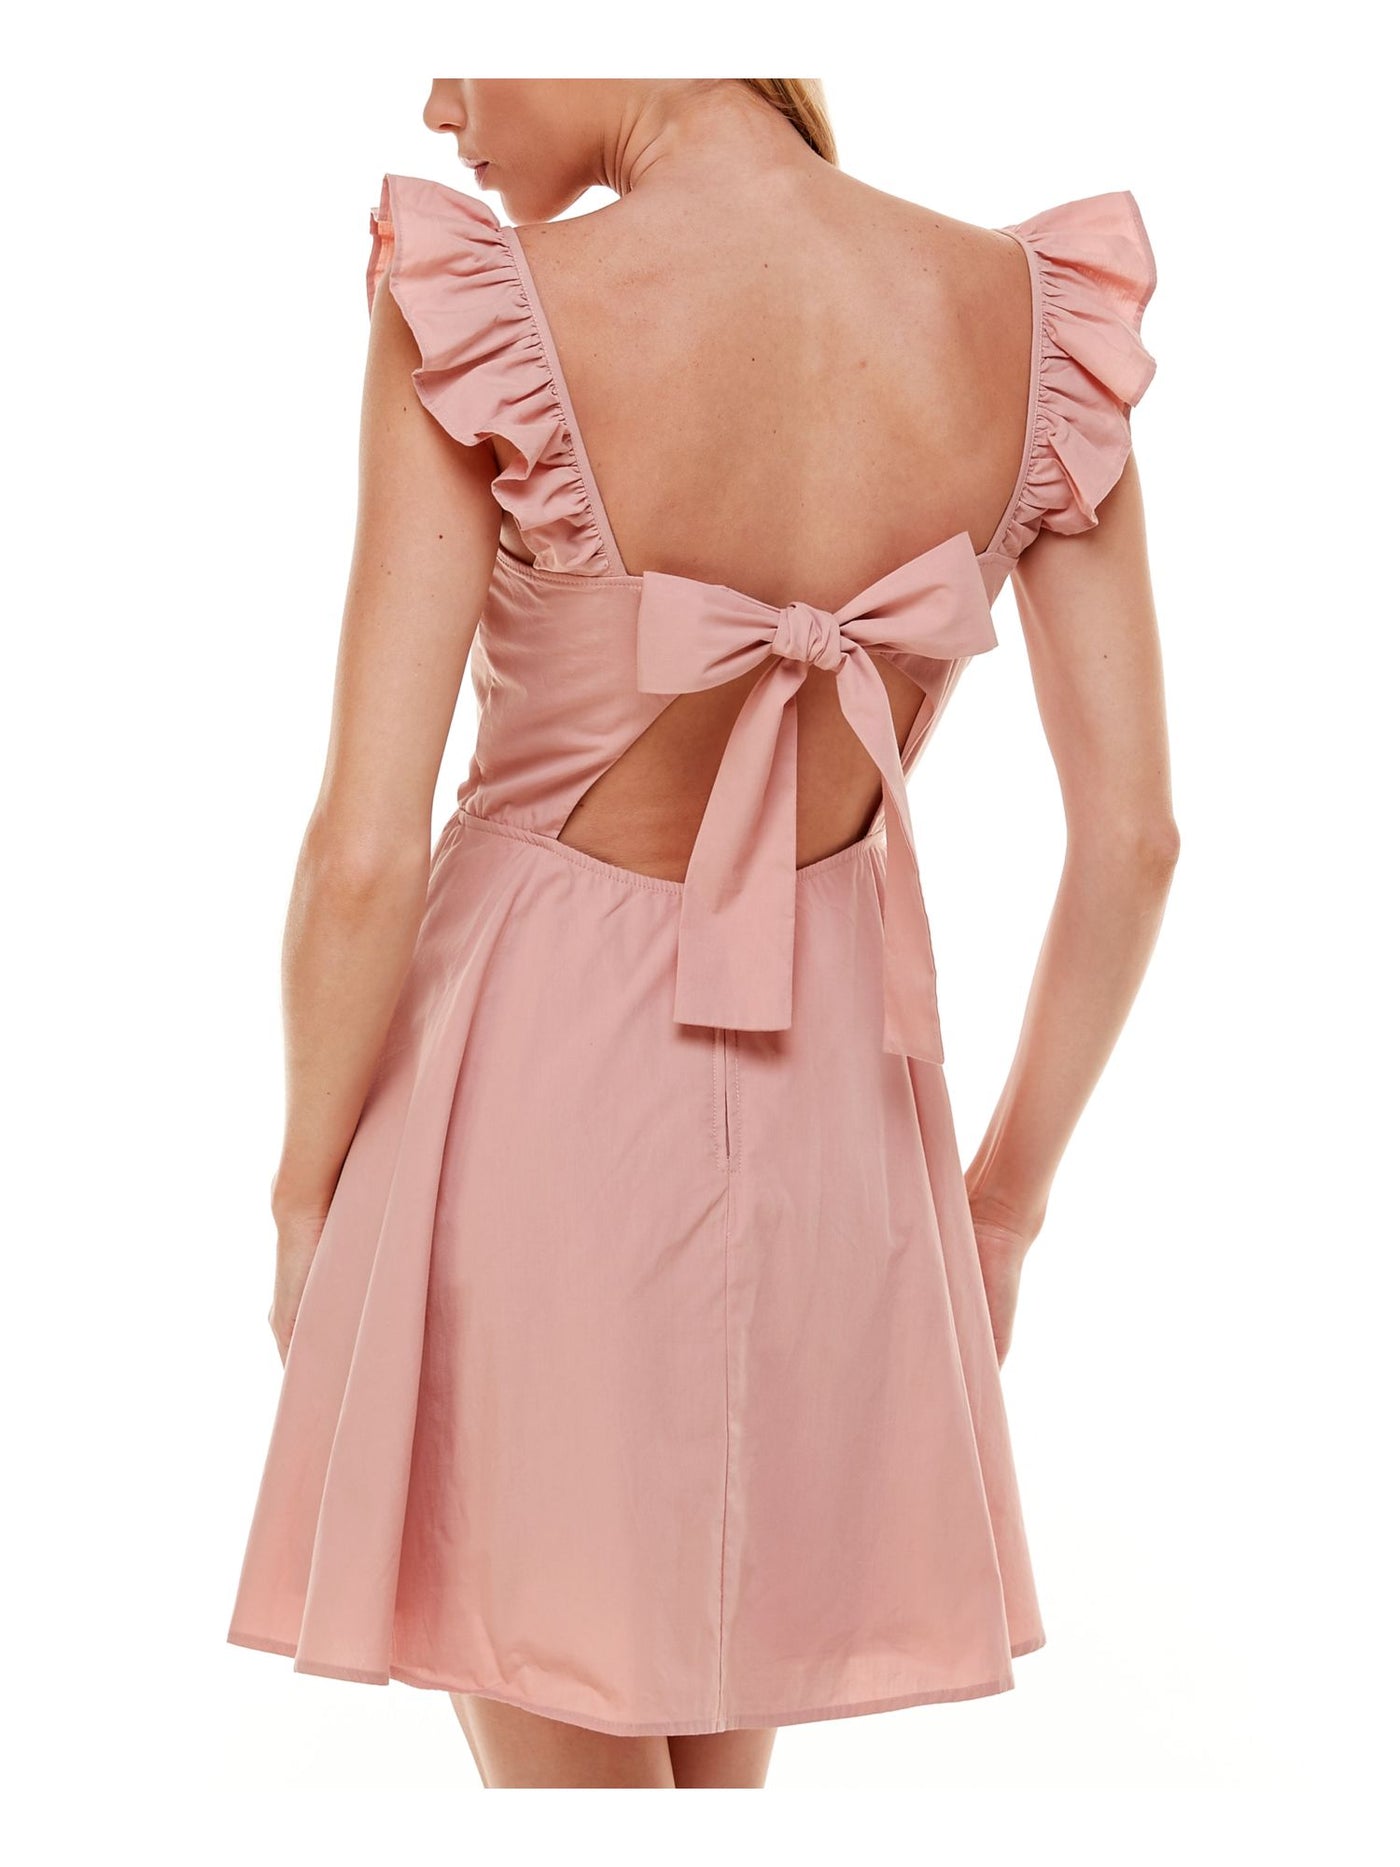 TRIXXI Womens Pink Zippered Tie Ruffled Neck And Straps Sleeveless Square Neck Short Party Fit + Flare Dress Juniors M